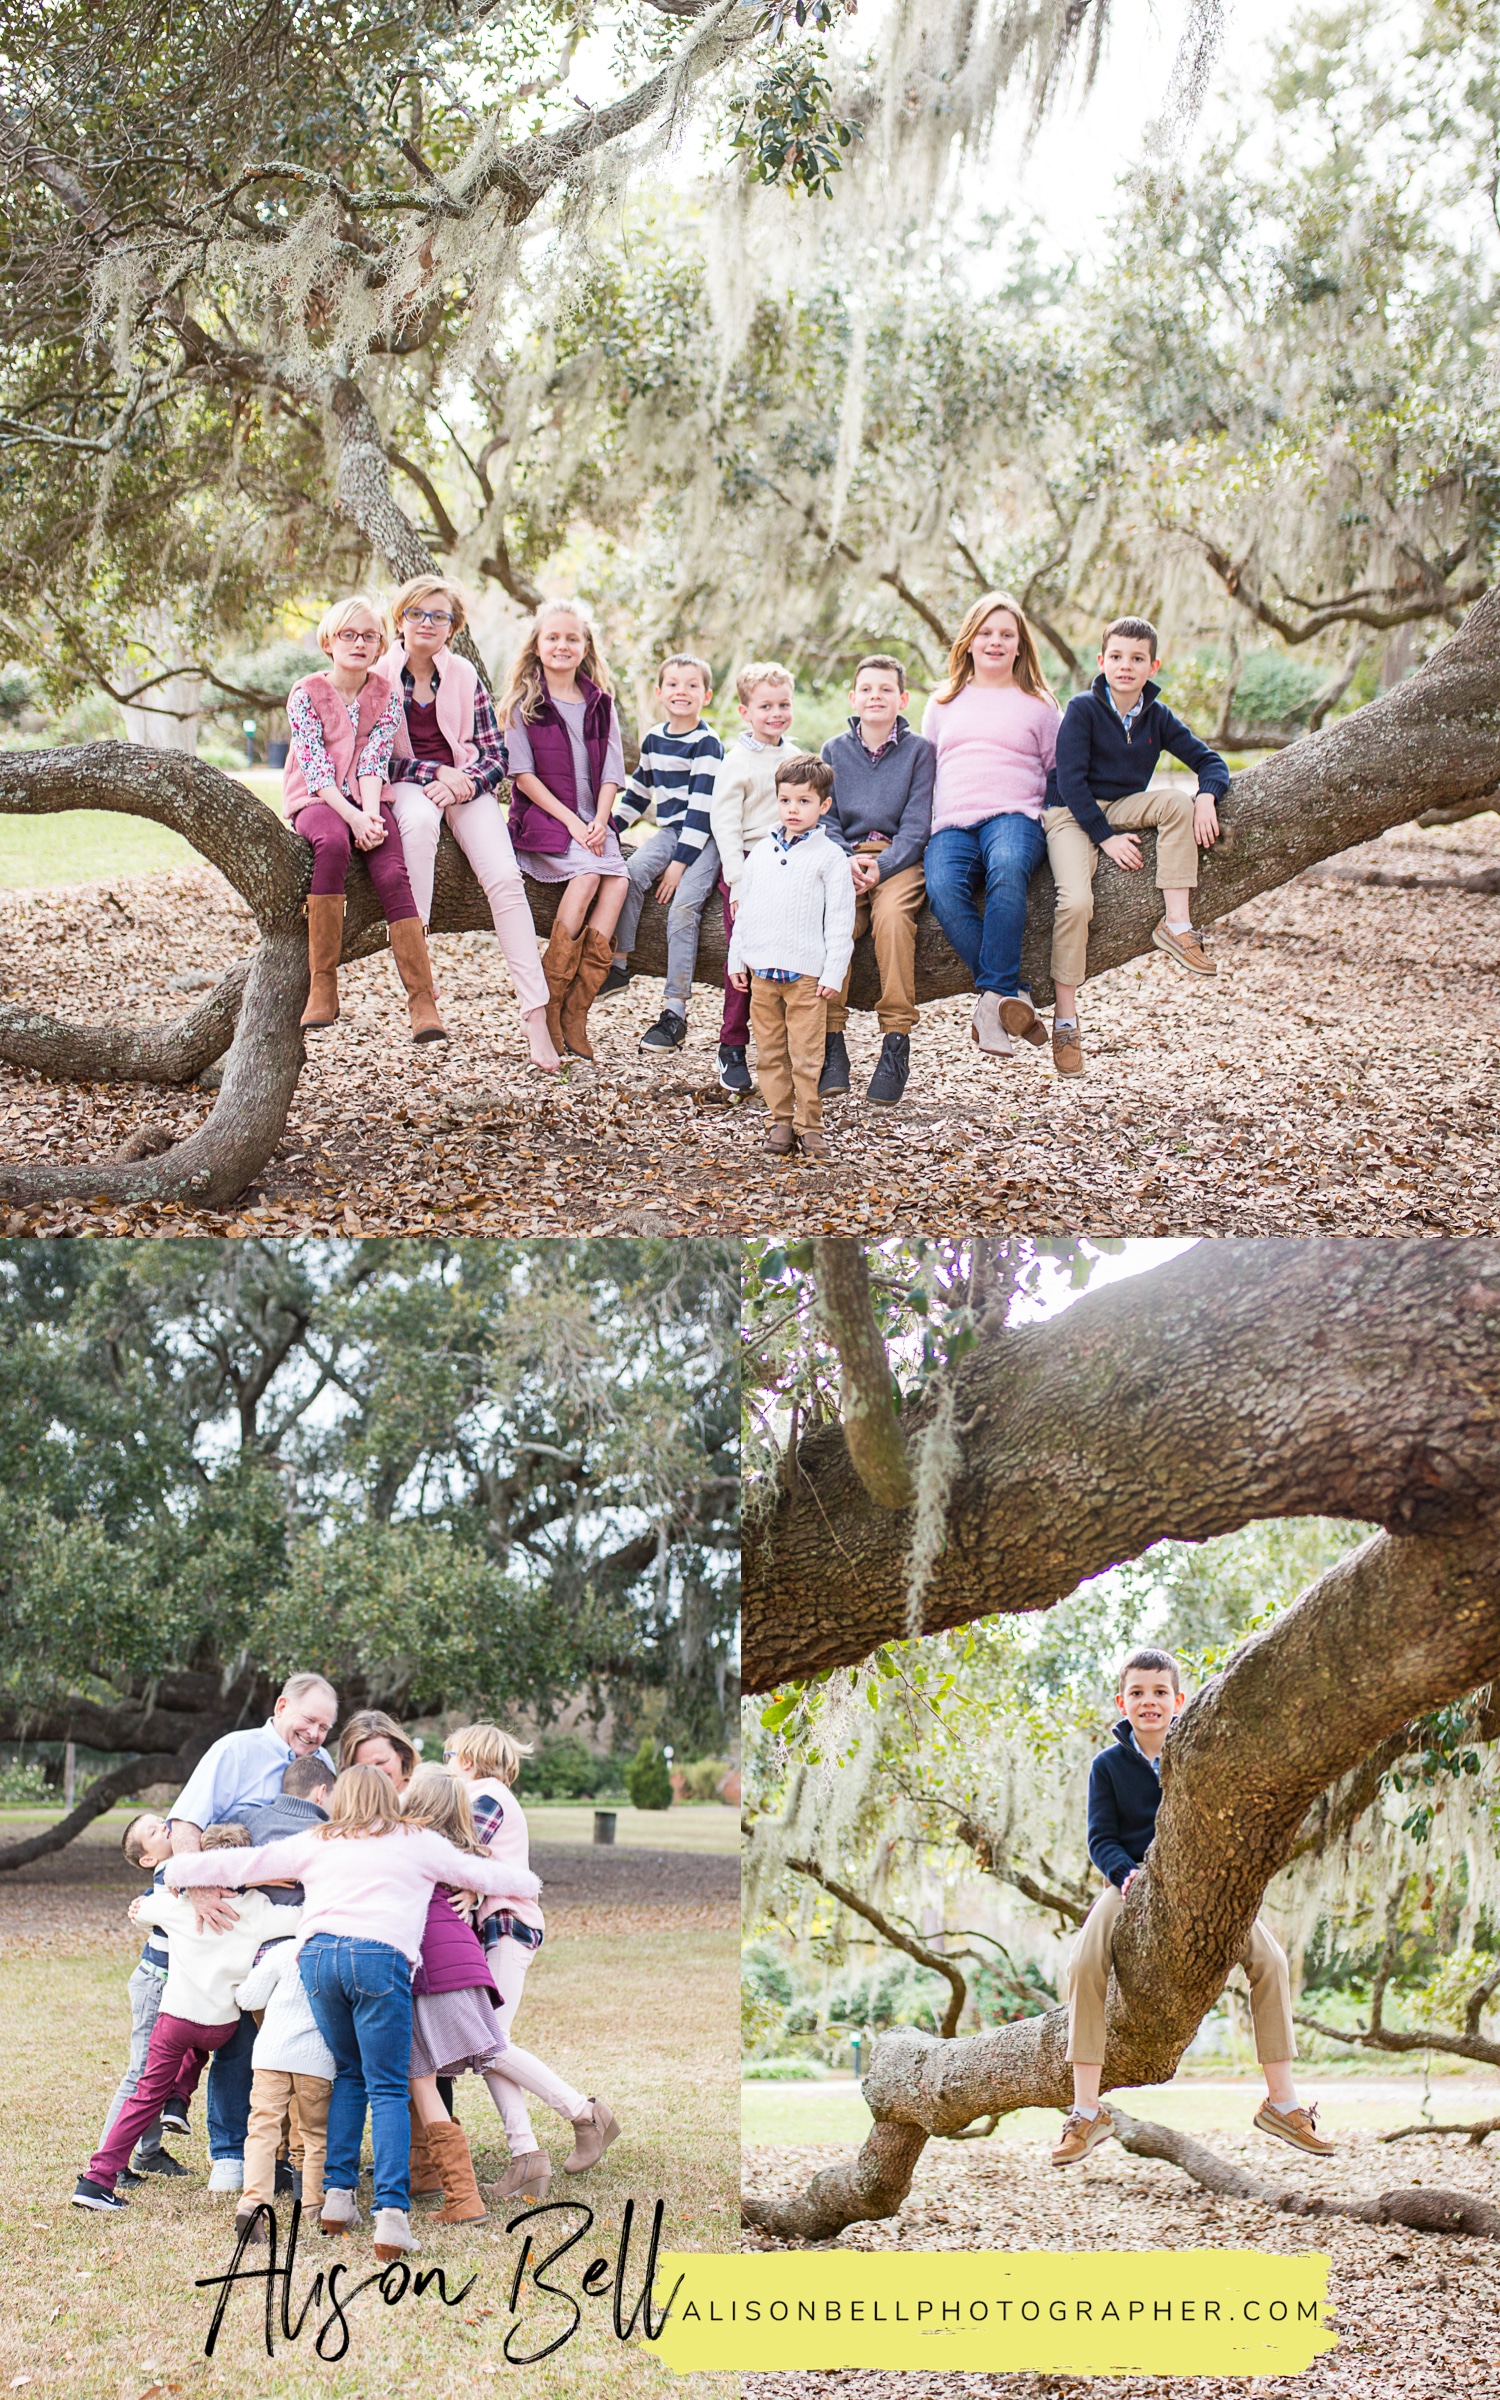 Extended family photography session in Hampton Park, Charleston South Carolina by Alison Bell, Photographer